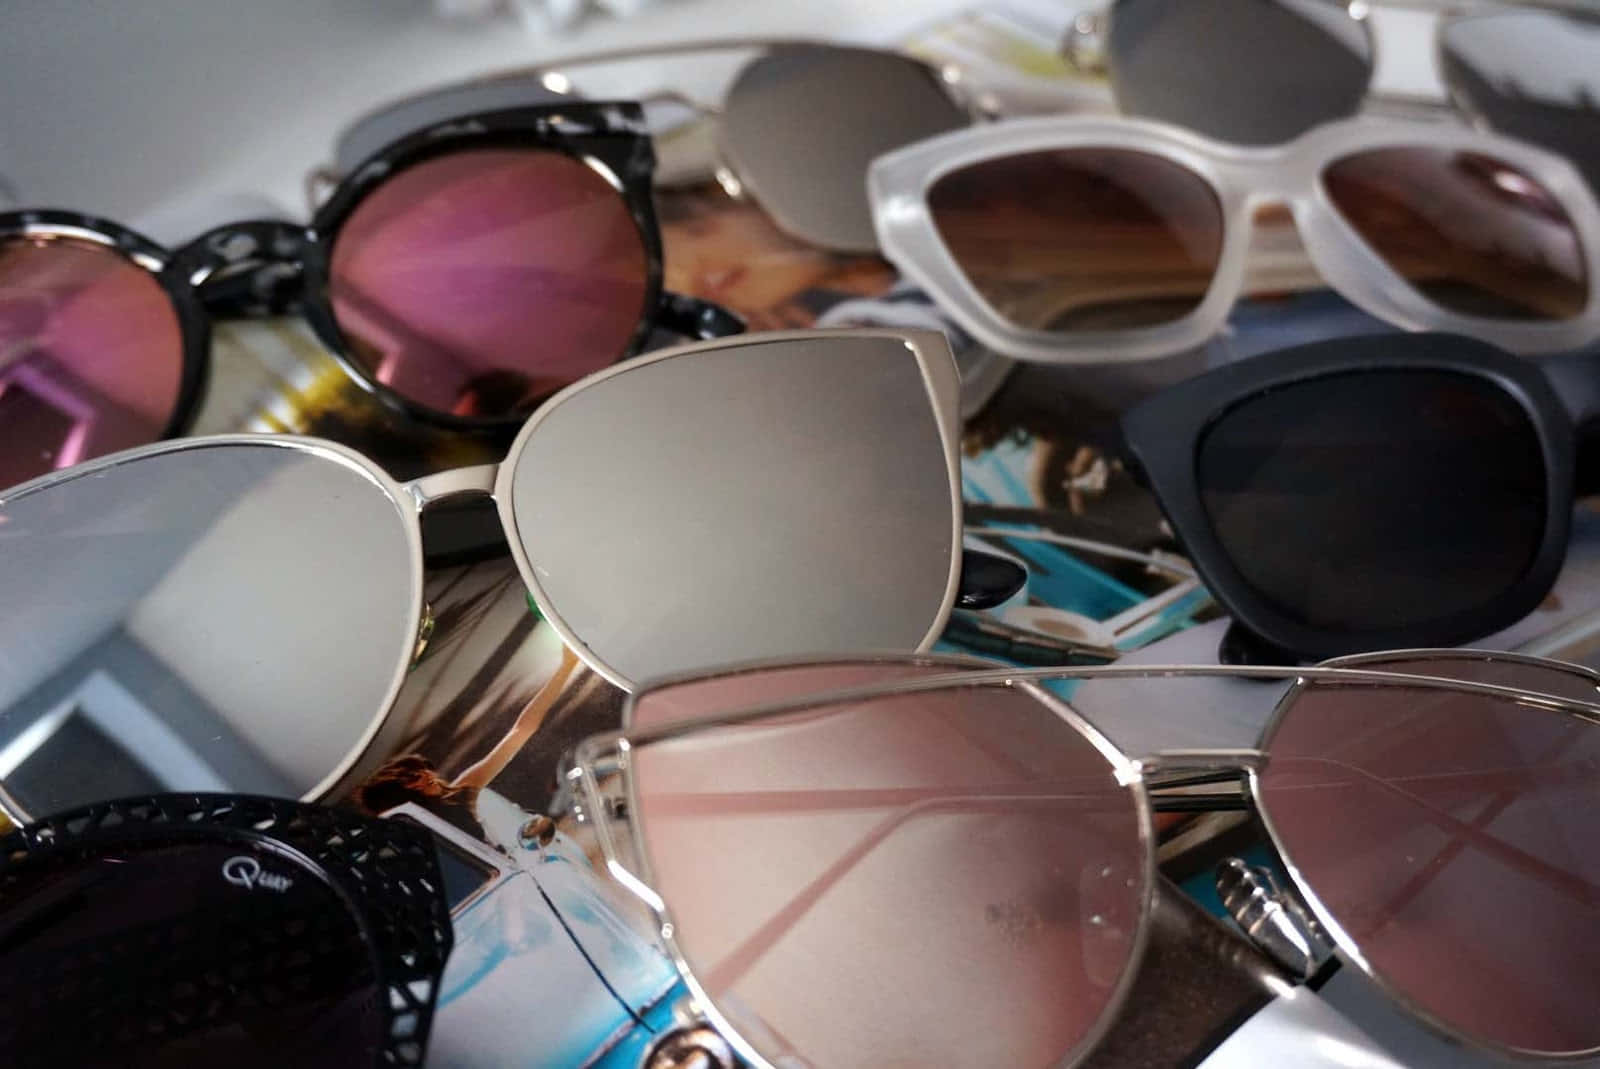 A Group Of Sunglasses Are Laying On Top Of A Table